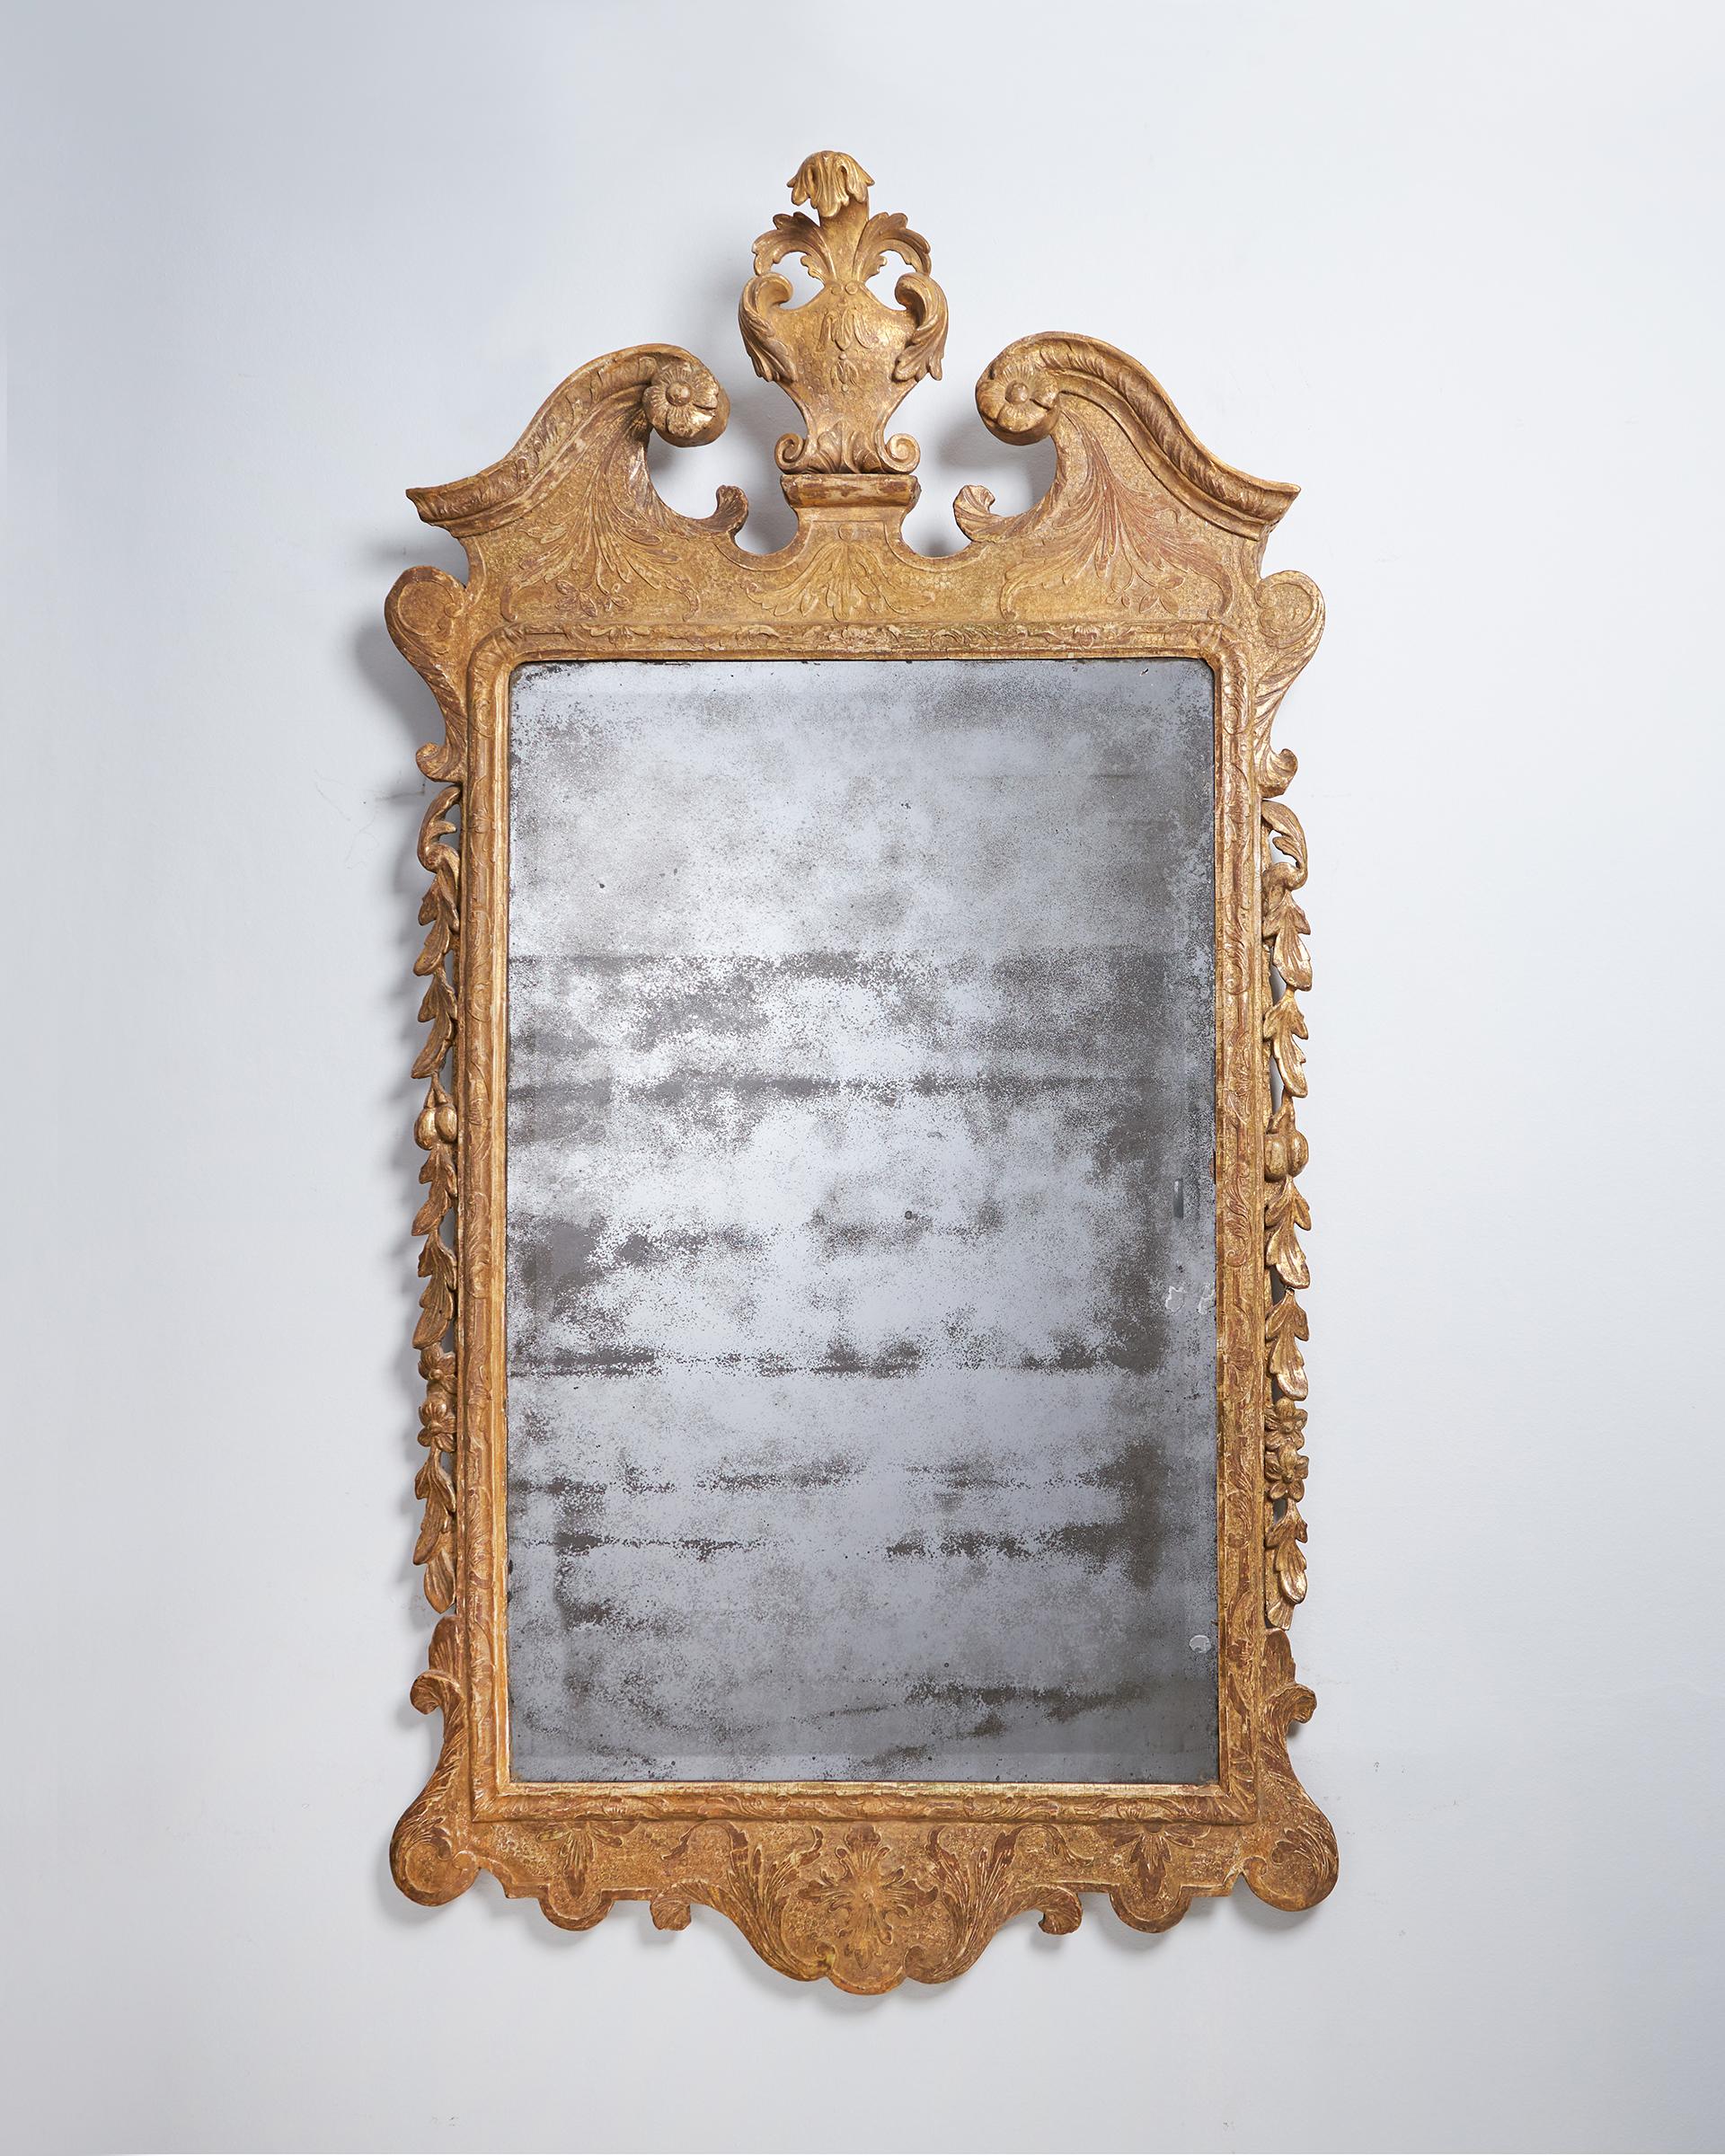 A fine and rare early 18th century George I Gilt Gesso pier or console mirror, circa 1720-1730

The period bevelled mirror plate sits within an upright lobed moulded gilt frame flanked by cascading carved foliage below a broken swan neck pediment,